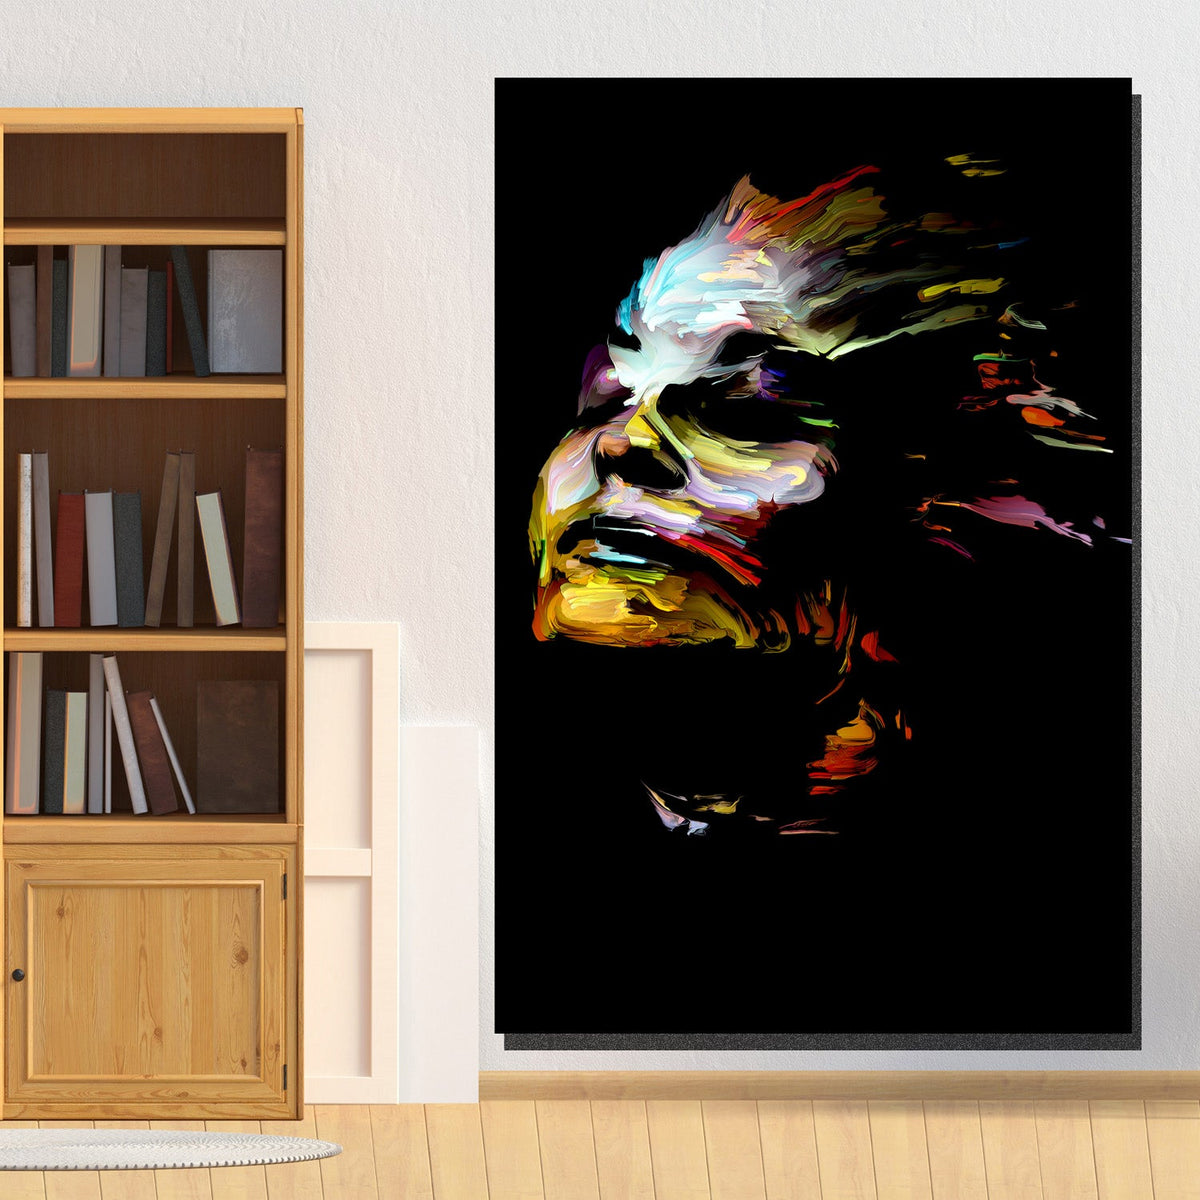 https://cdn.shopify.com/s/files/1/0387/9986/8044/products/FreedomCanvasArtprintStretched-3.jpg